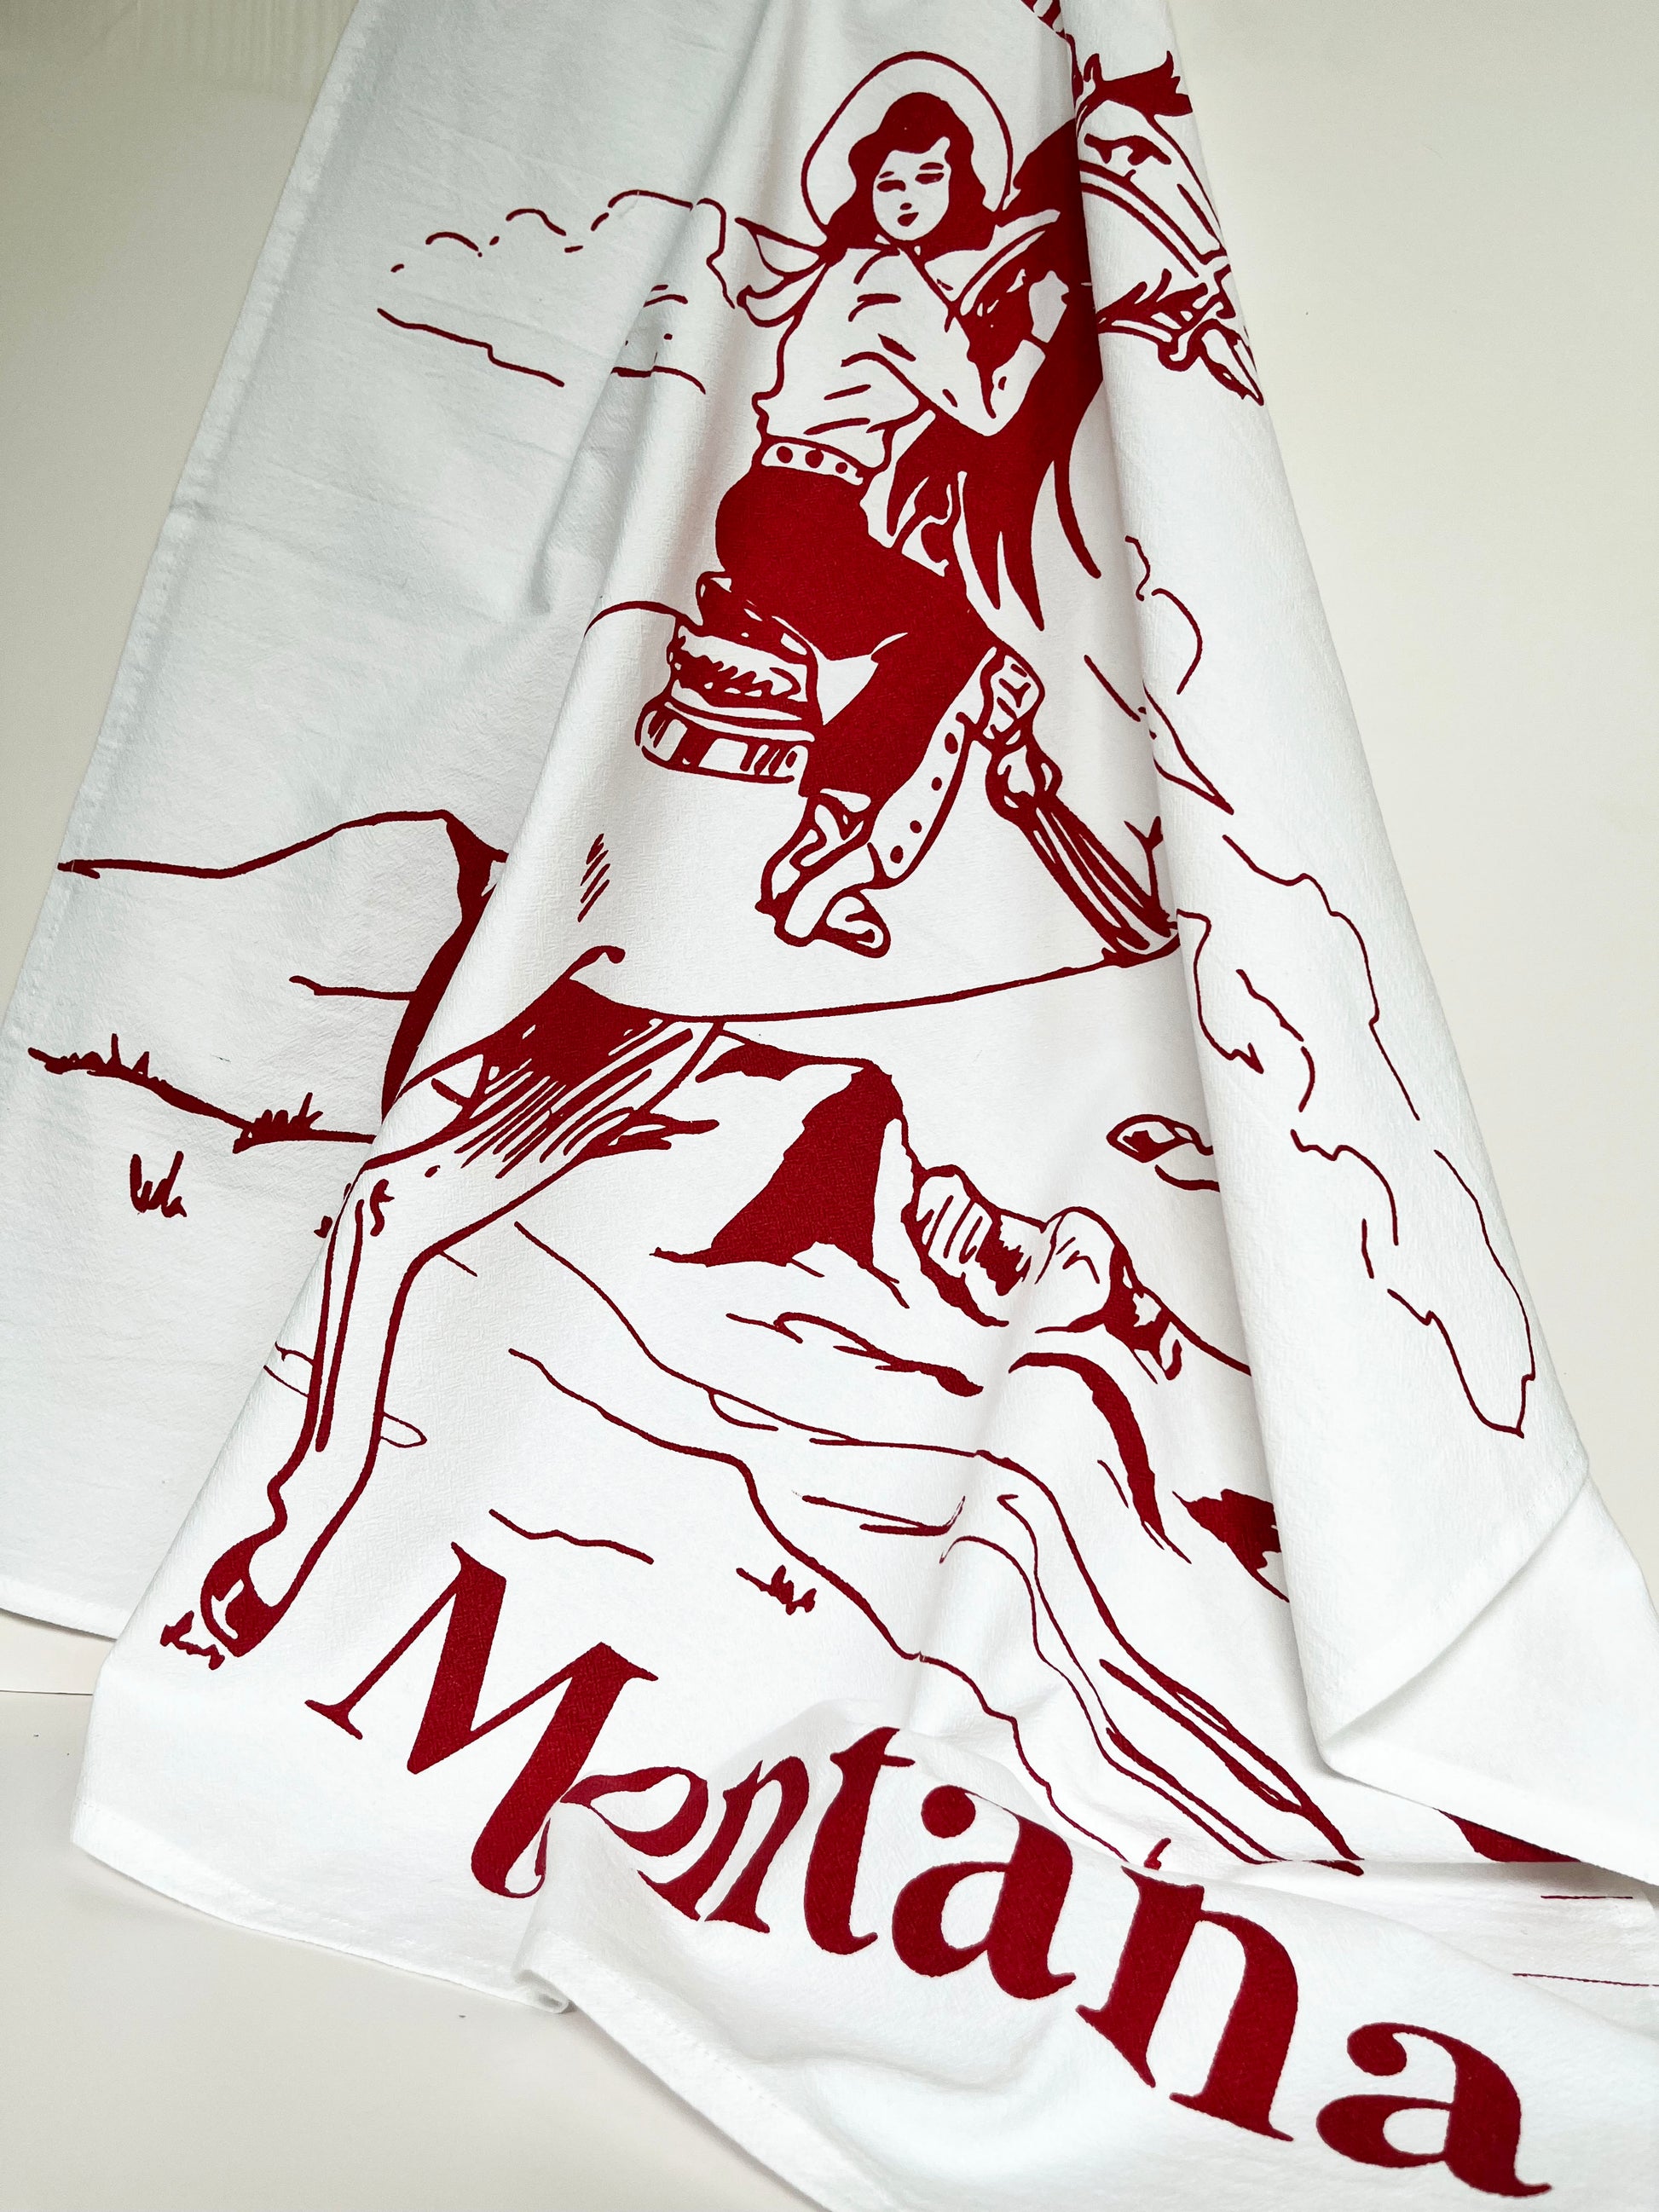 cotton kitchen towel hand drawn illustration western cow girl cowgirl riding bucking horse red mountains plains big sky text says there's no place like montana coin laundry tea towels 